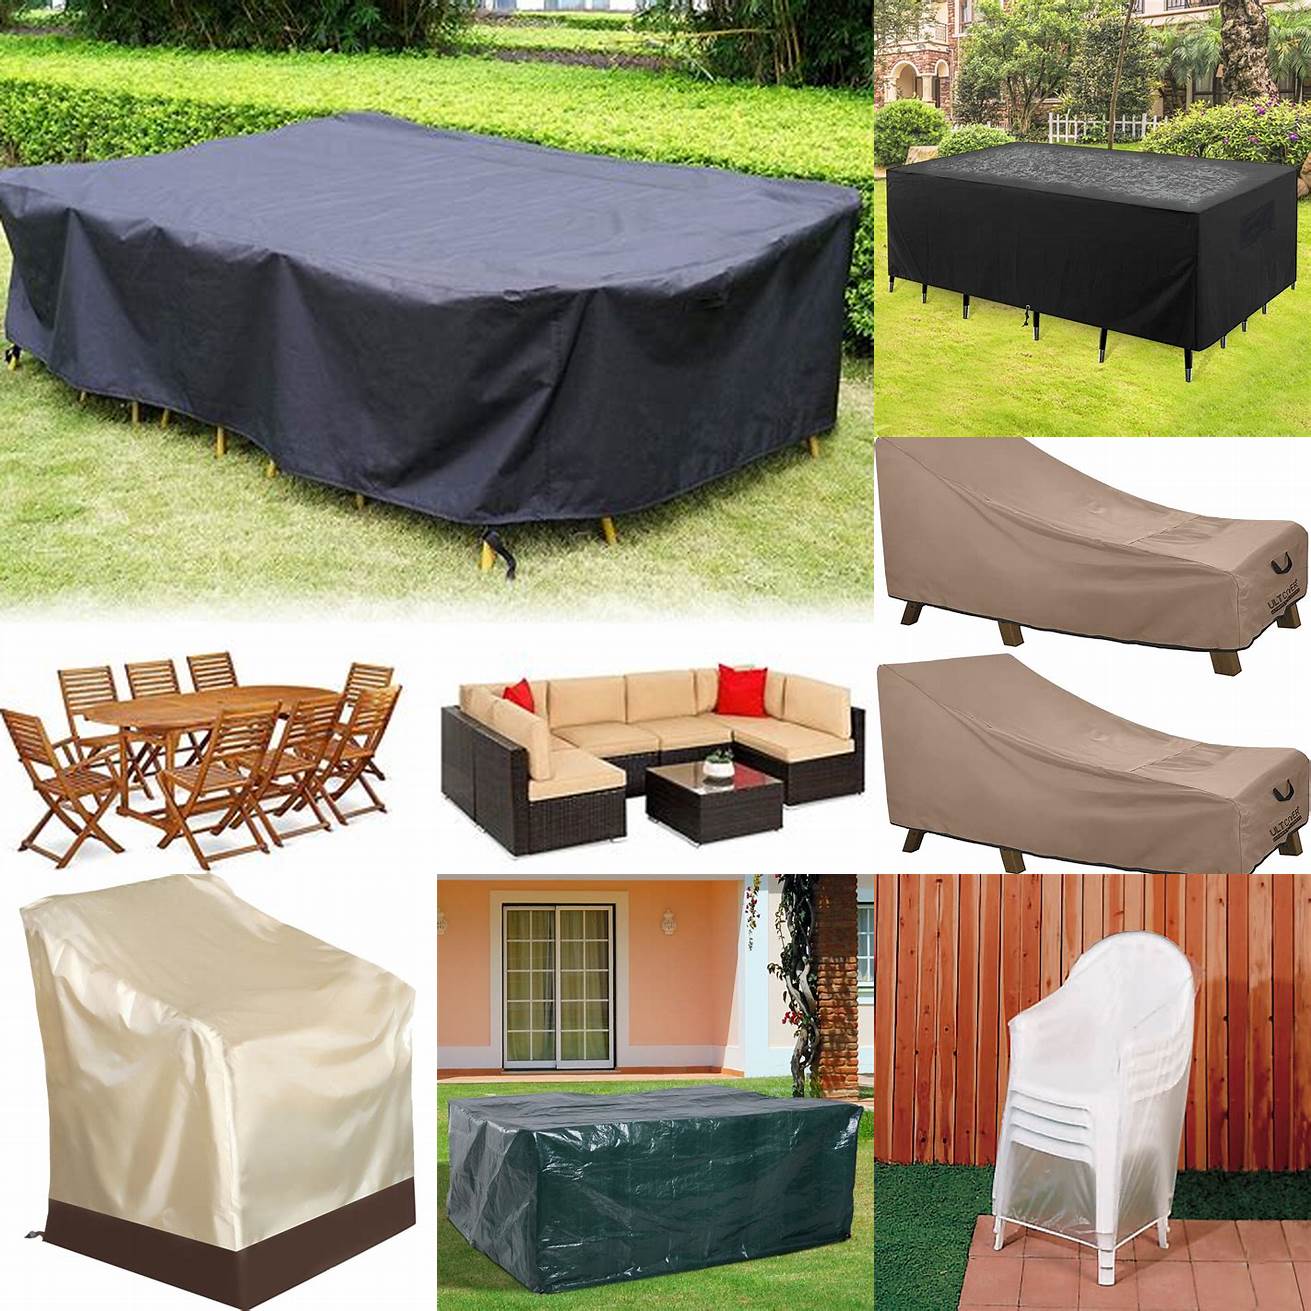 Outdoor Teak Furniture Covered with a Plastic Cover